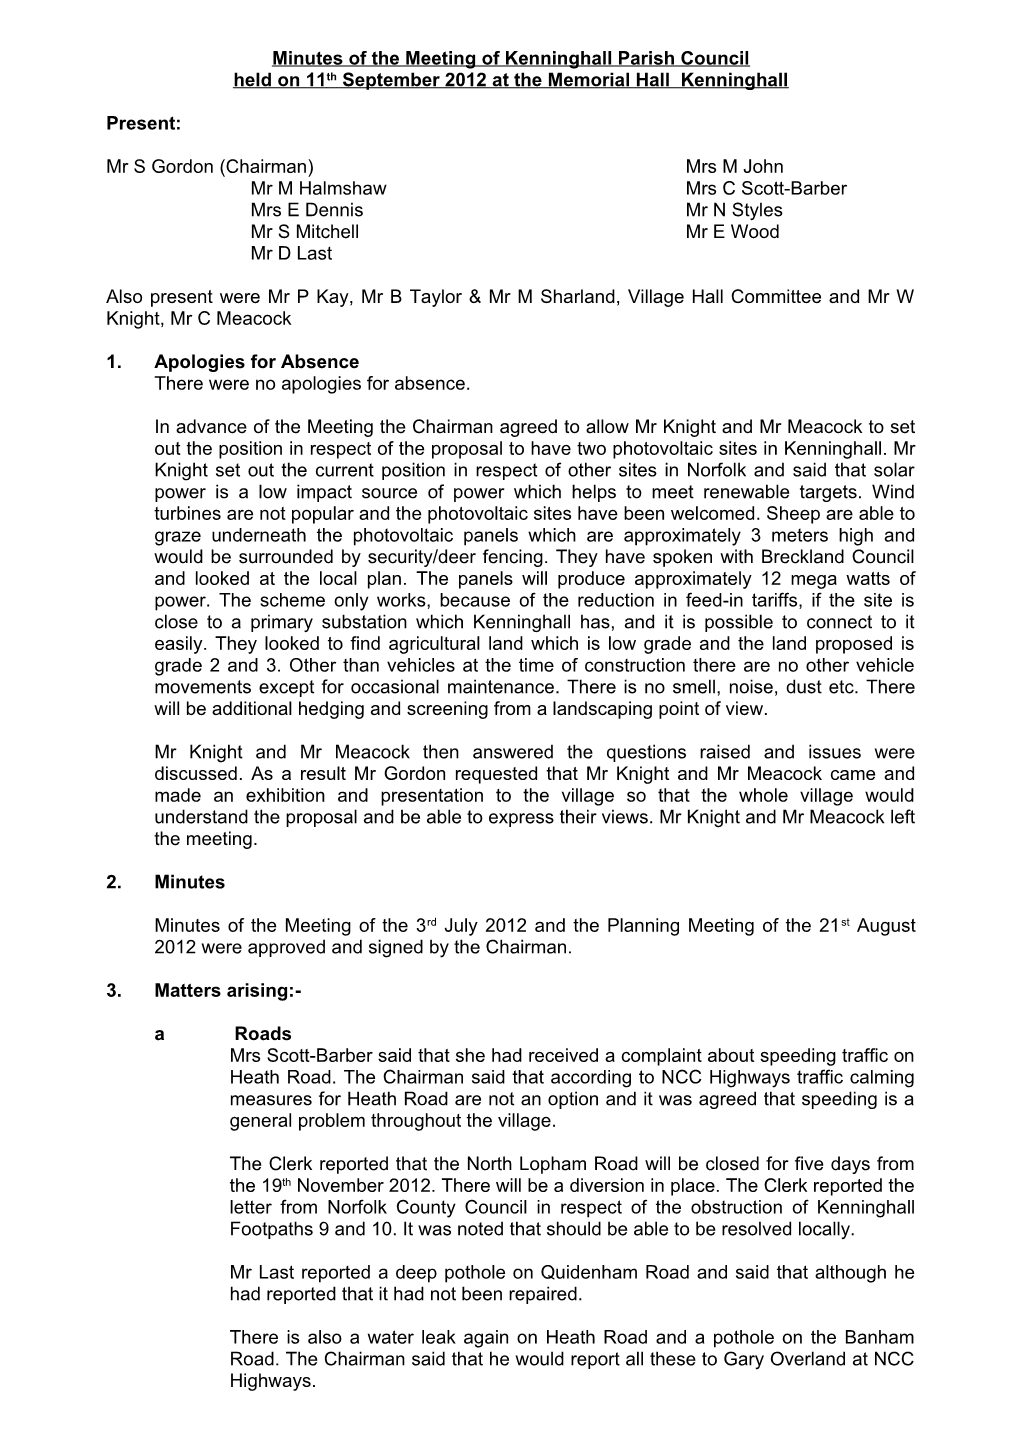 Minutes of the Meeting of Kenninghall Parish Council